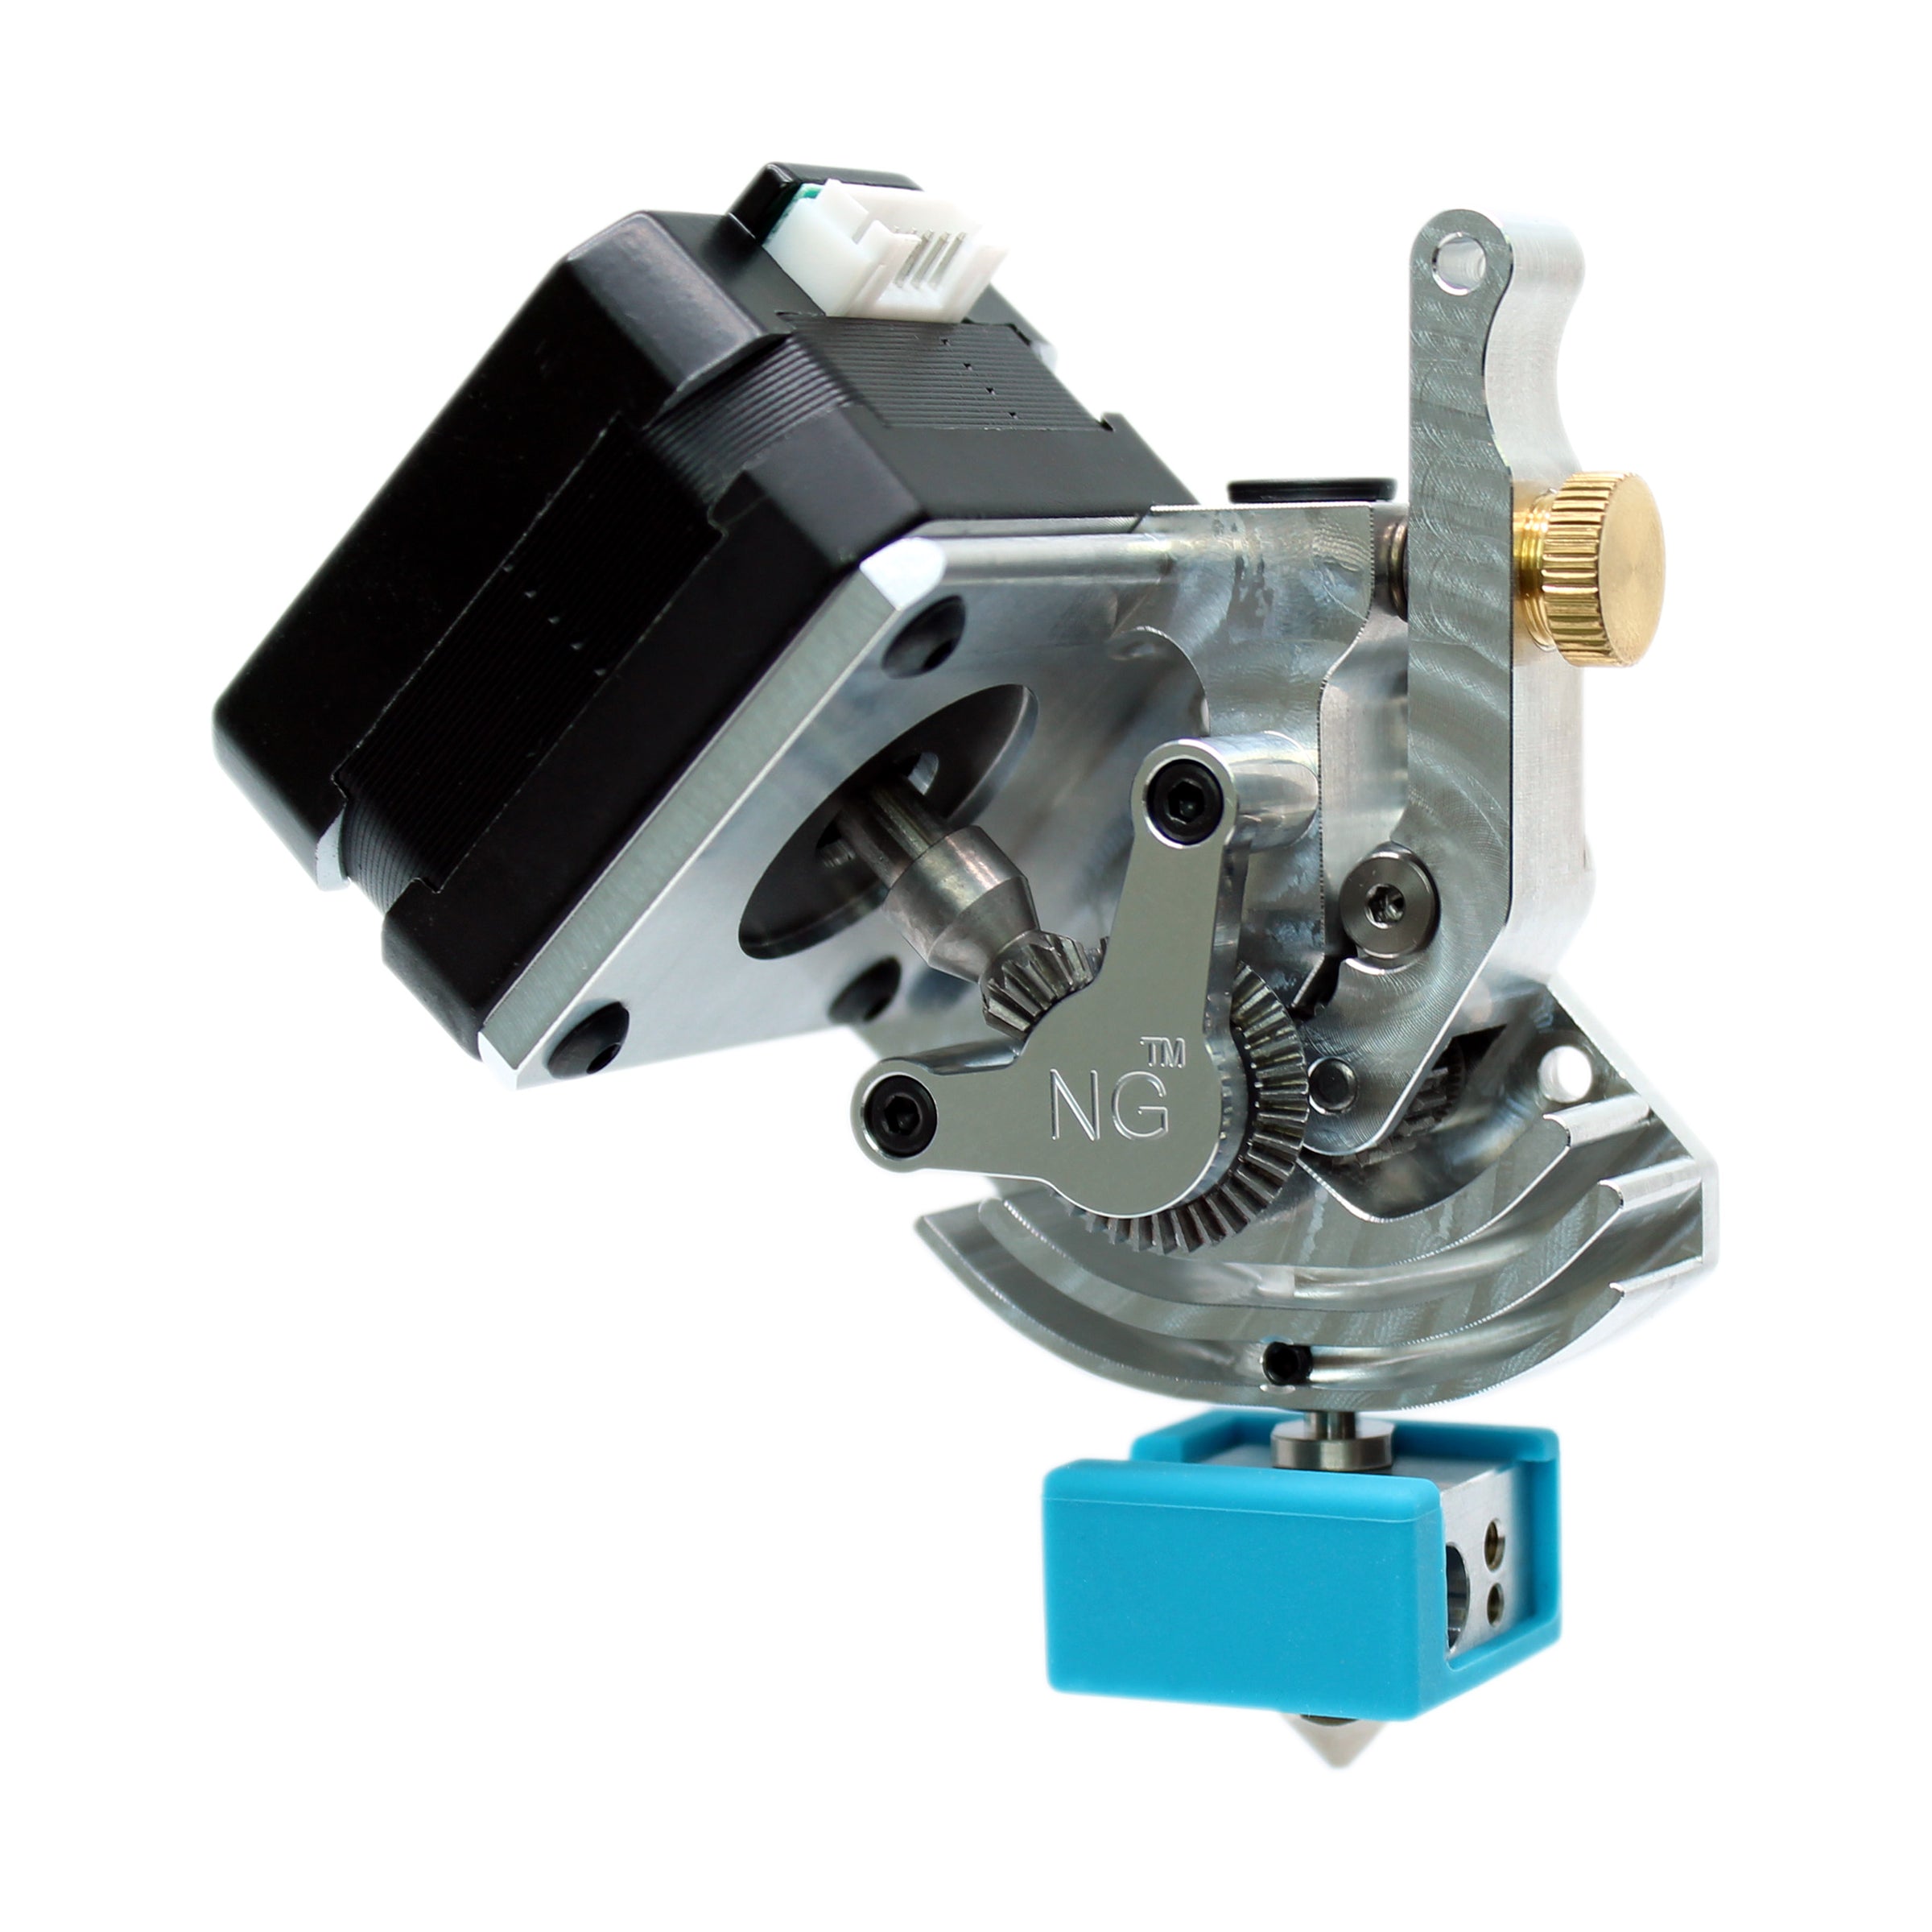 Micro Swiss NG™ Direct Drive Extruder for Creality CR-10S Pro V2 and CR-10 Max